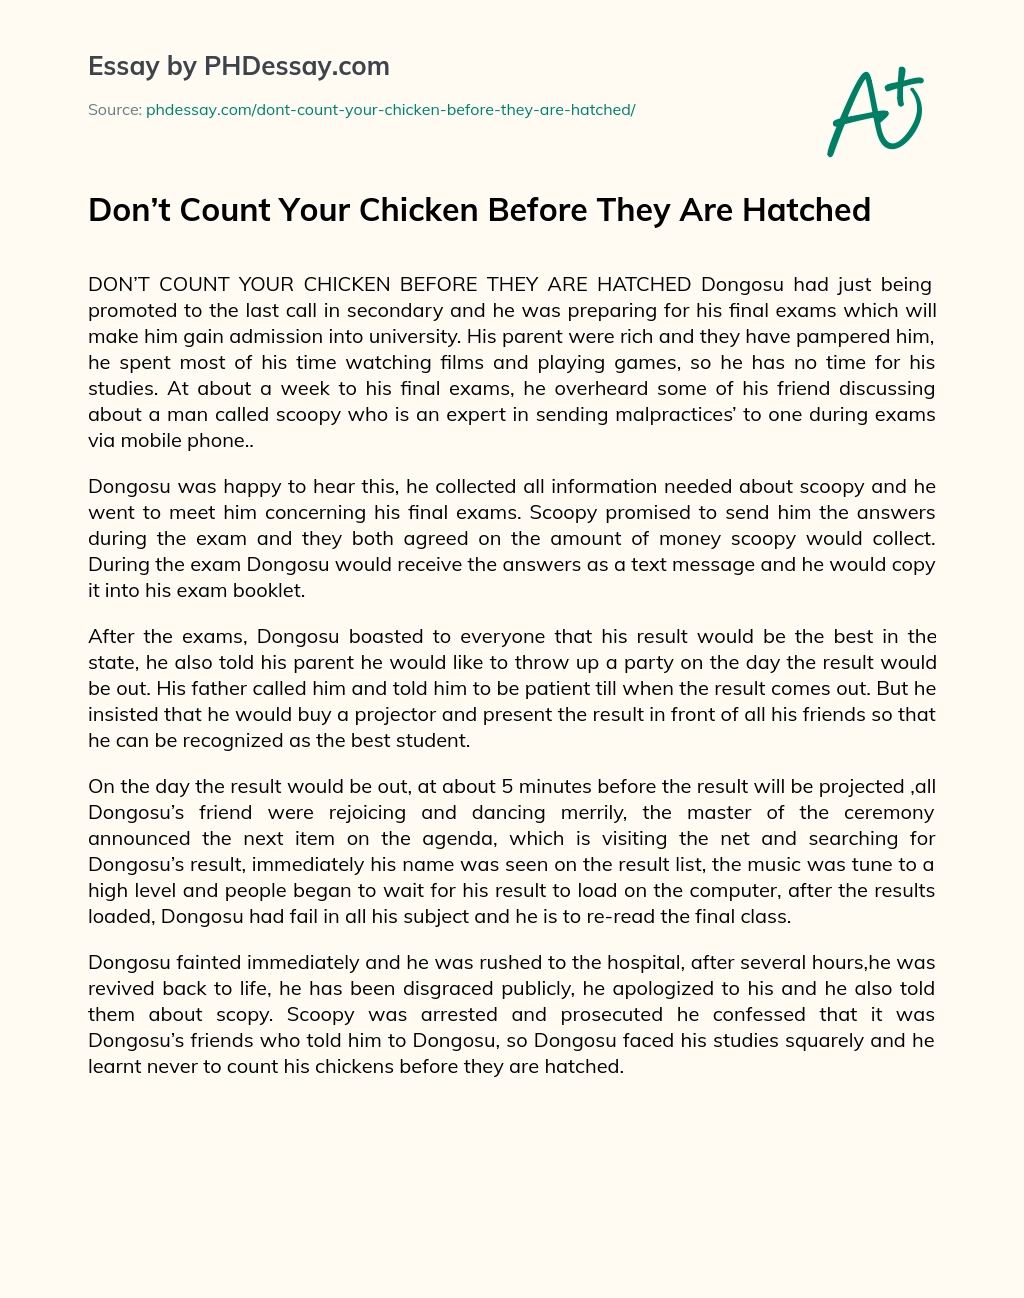 Don’t Count Your Chicken Before They Are Hatched essay